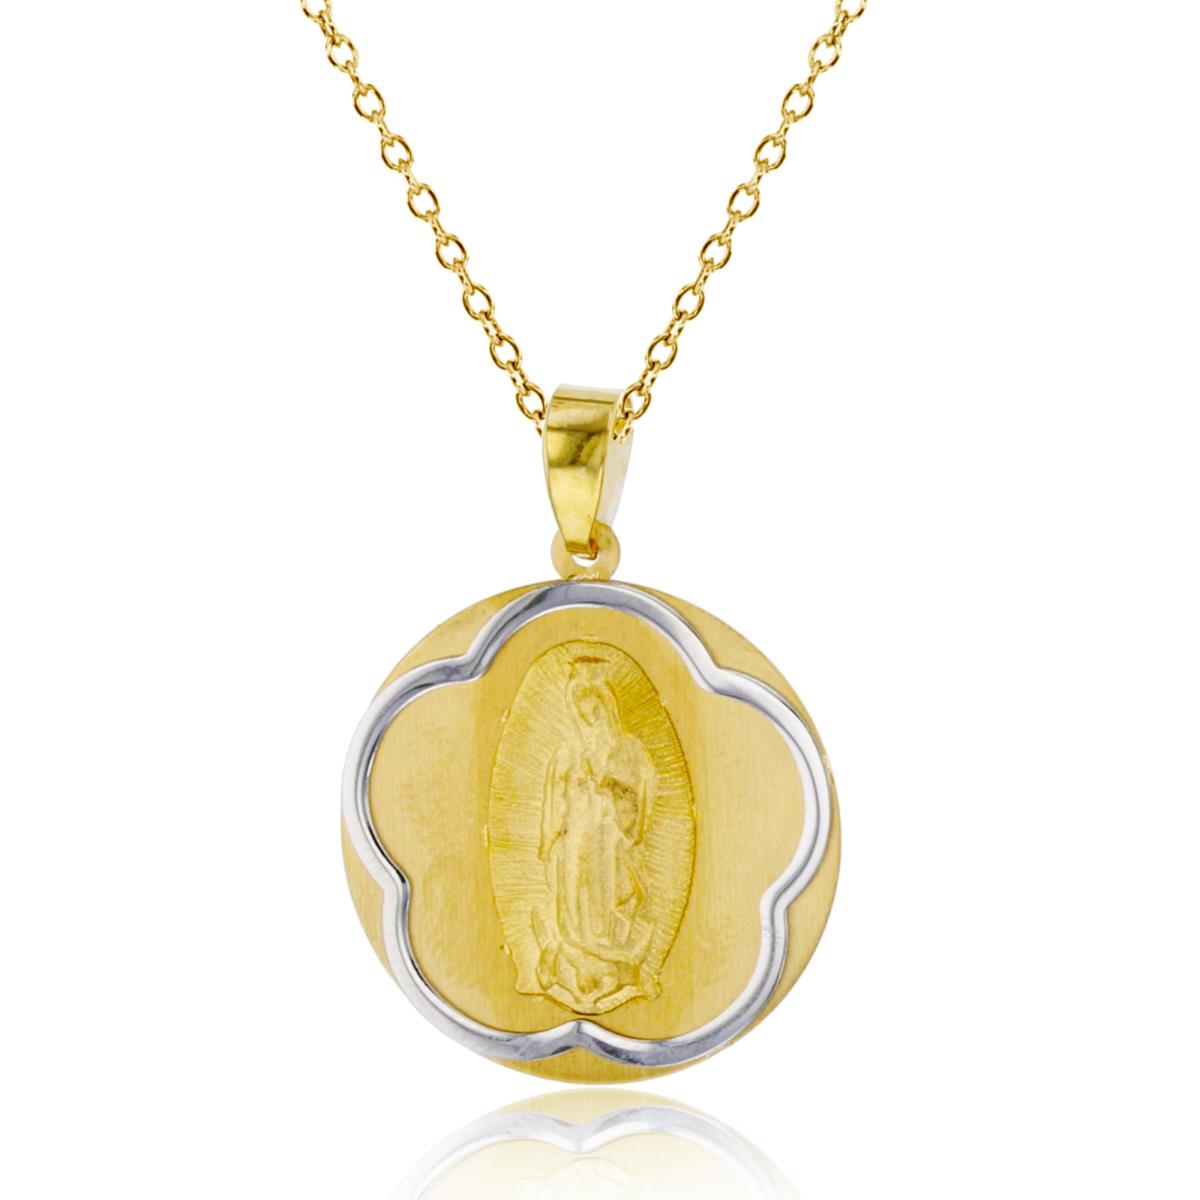 10K Two-Tone Gold 25x18mm Satin Virgin Mary Clover Medallion 18" Necklace